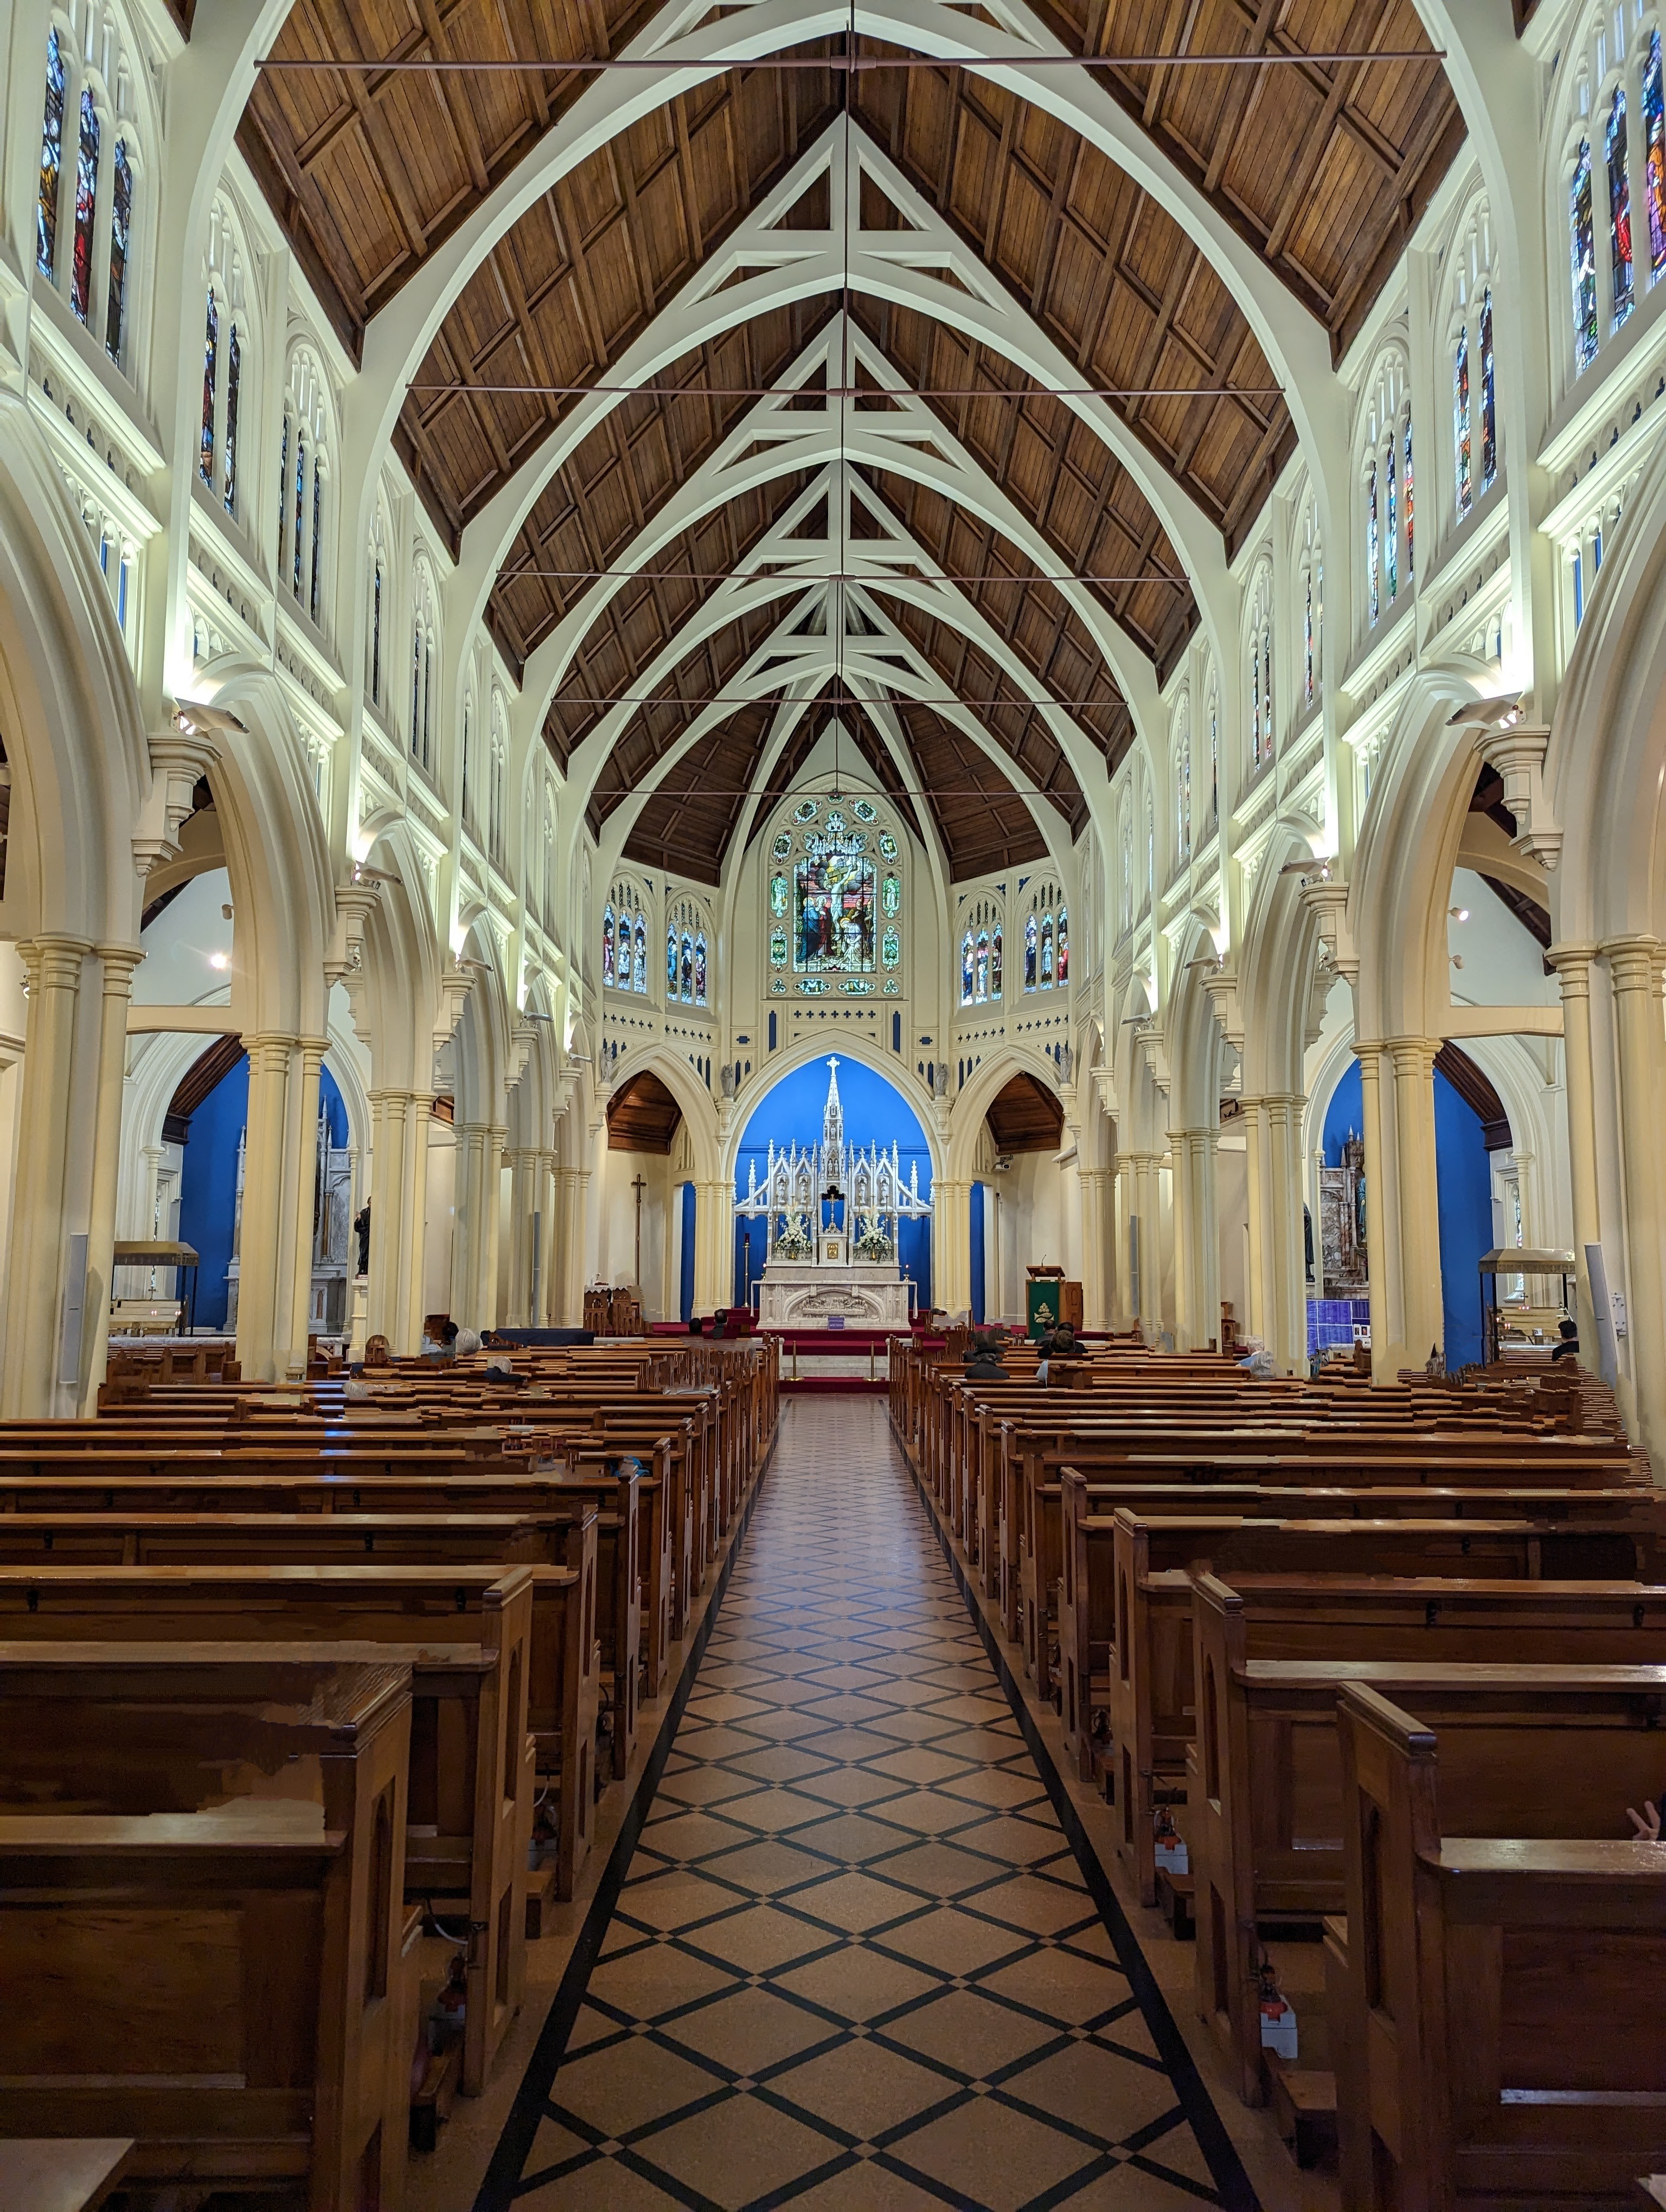 Inside of a large church looking down the aisle towards the altar. A large wooden roof with white spans covers empty pews where AI has removed all the people